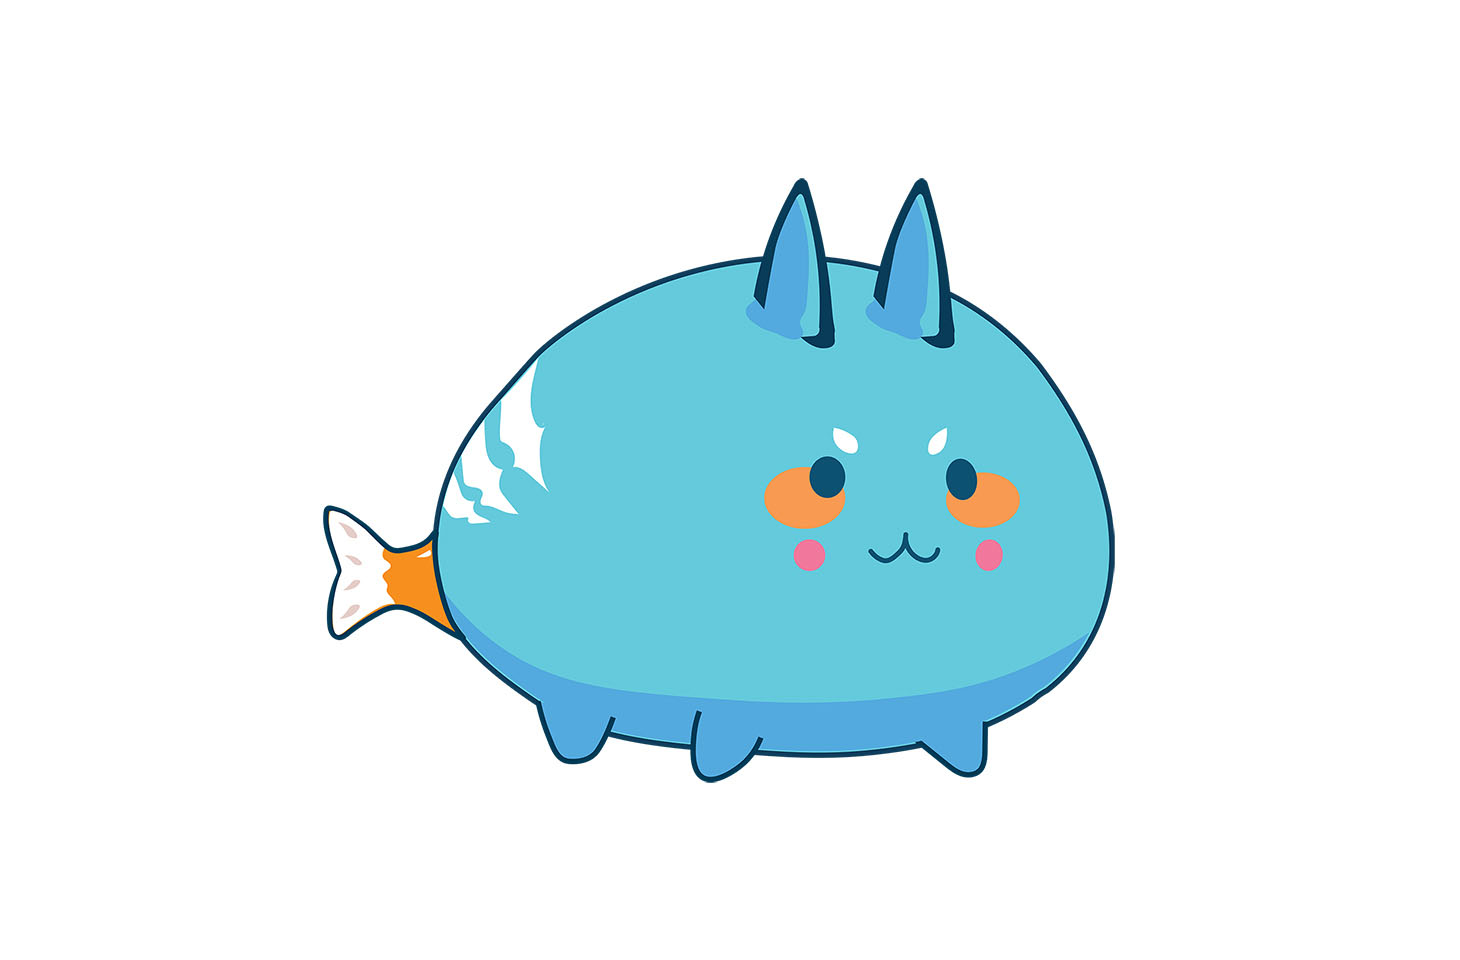 NFT character from blockchain-based game Axie Infinity